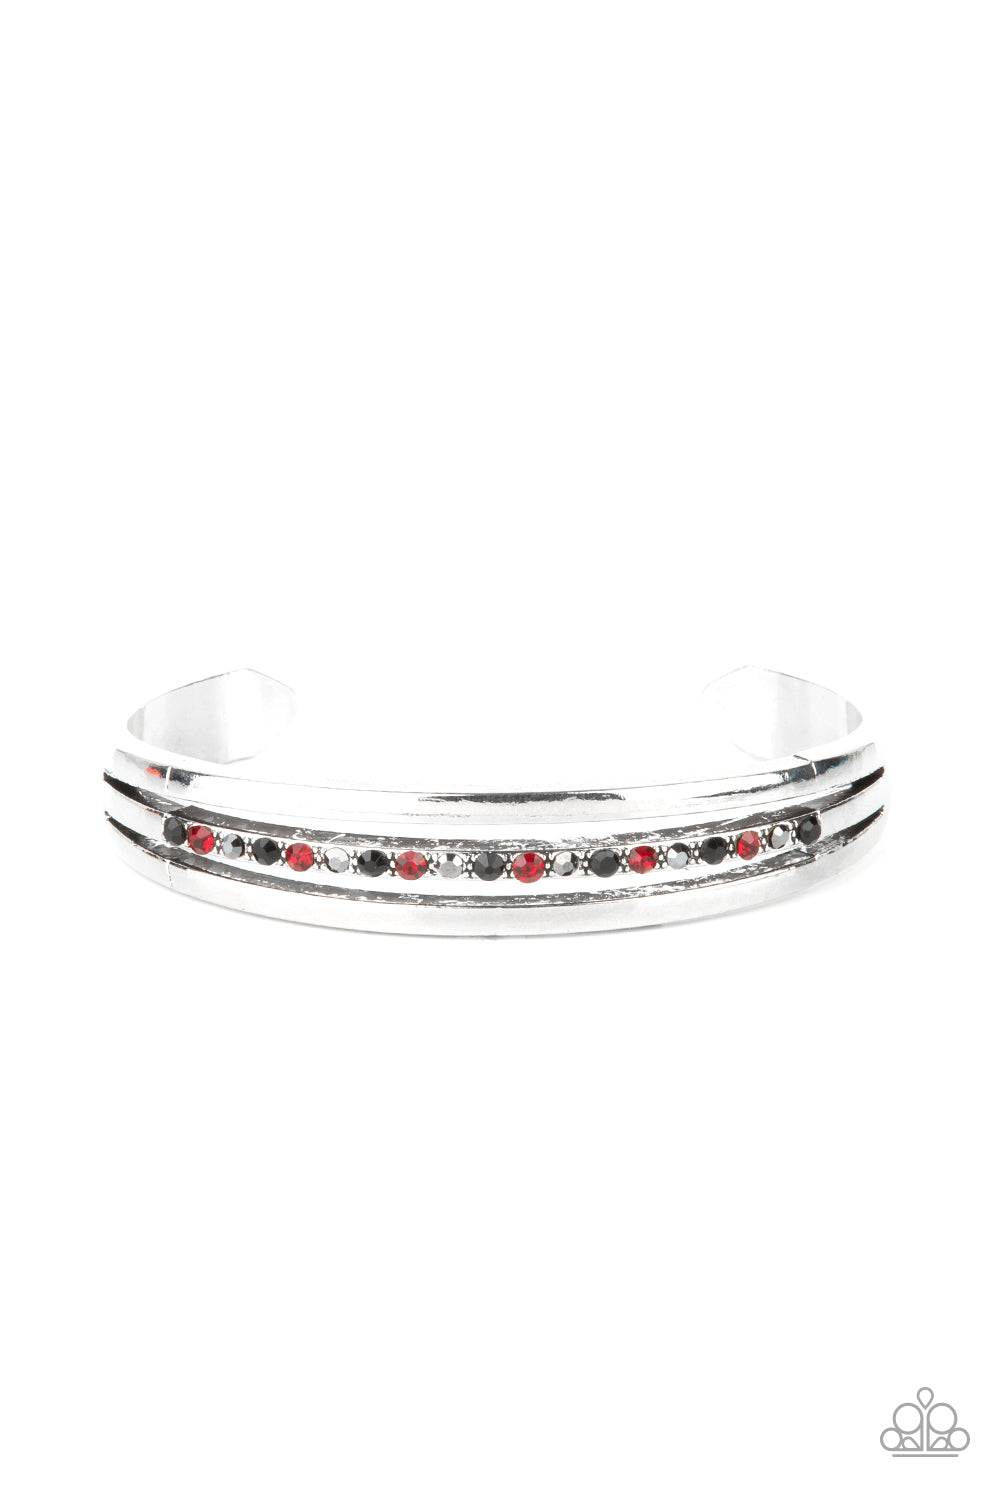 A Point Of Pride Multi Cuff Bracelet - Paparazzi Accessories  Two glistening silver bars flank a row of black, red, and hematite rhinestones, coalescing into a dainty layered cuff around the wrist for a dash of refined edge.  All Paparazzi Accessories are lead free and nickel free!   Sold as one individual bracelet.